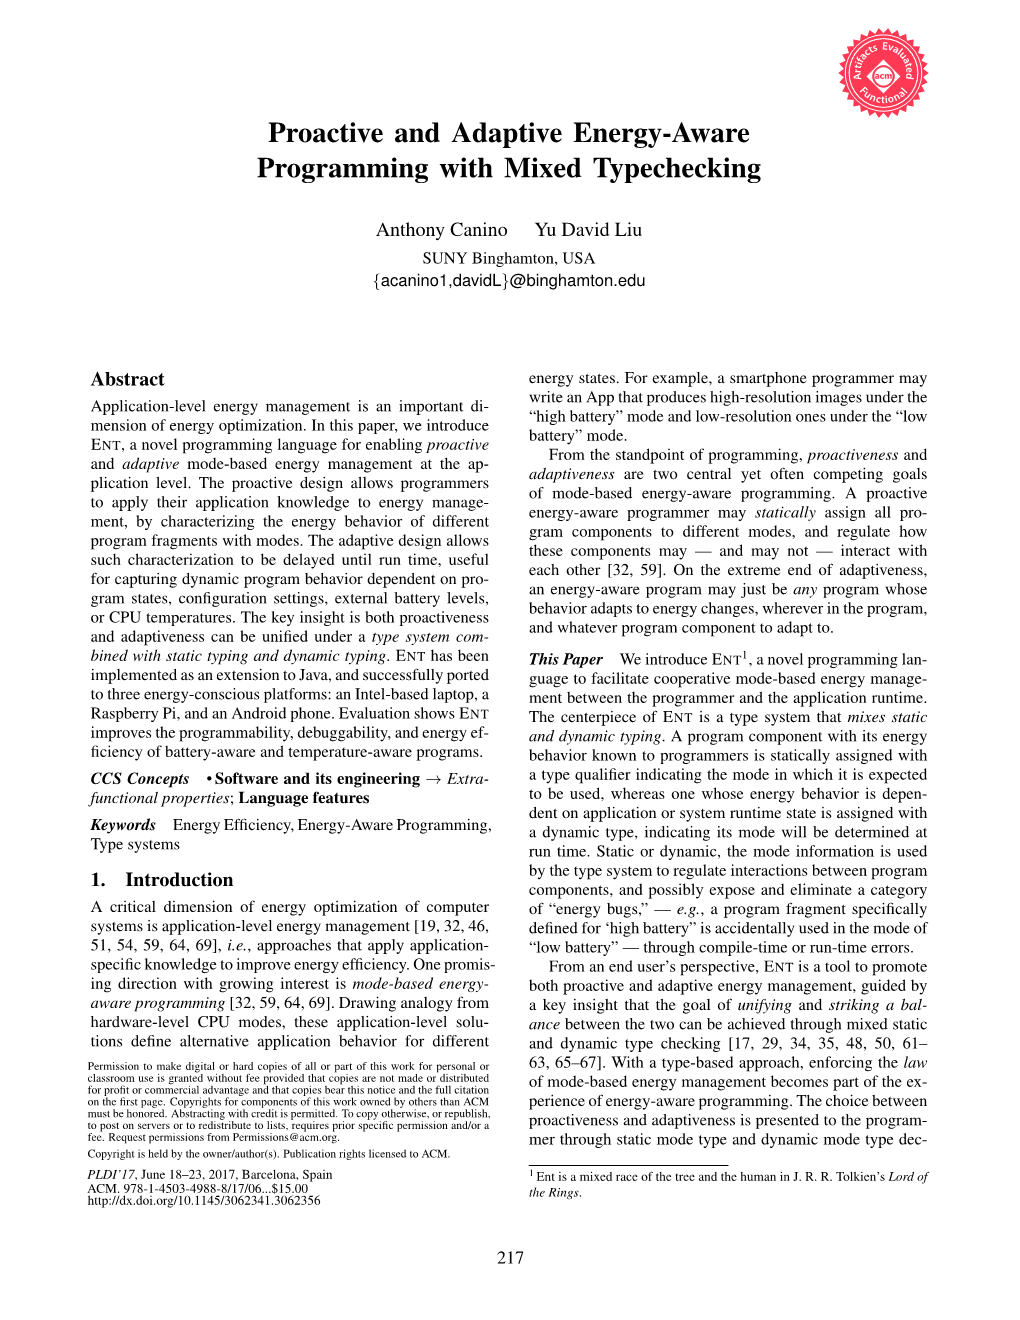 Proactive and Adaptive Energy-Aware Programming with Mixed Typechecking